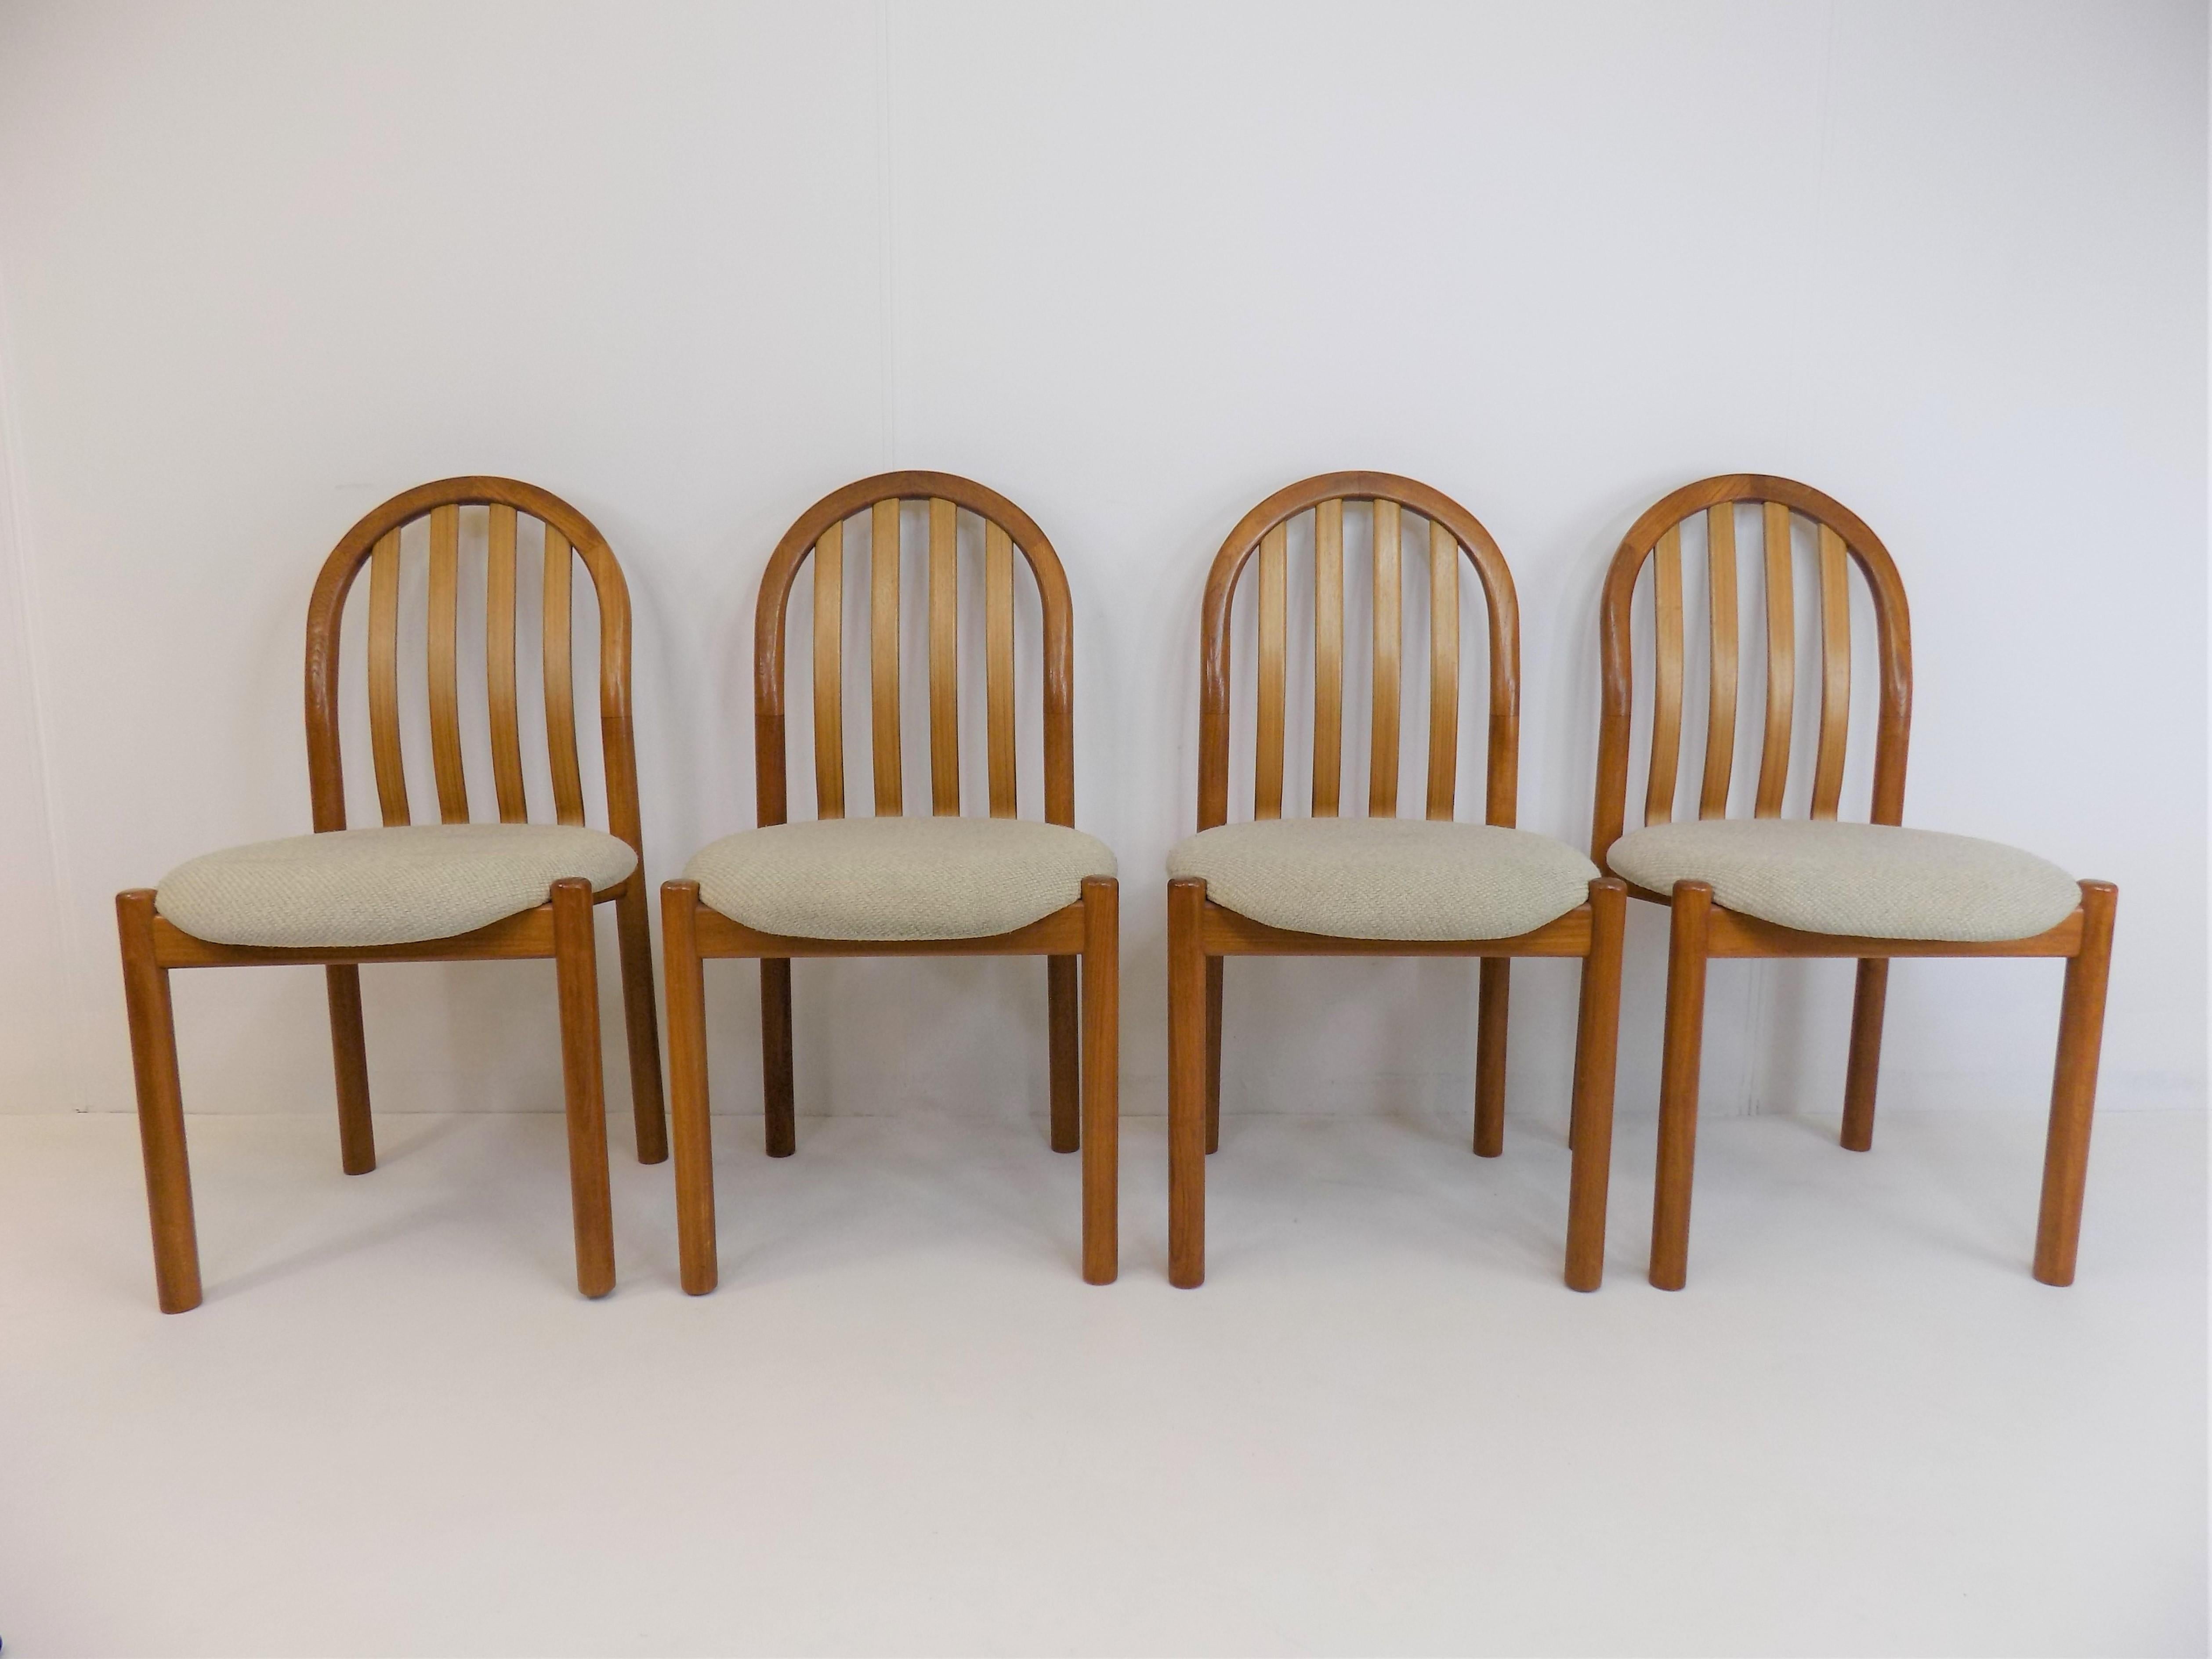 Koefoeds Hornslet Set of 4 Teak Dining Chairs Ole by Niels Koefoed In Good Condition For Sale In Ludwigslust, DE